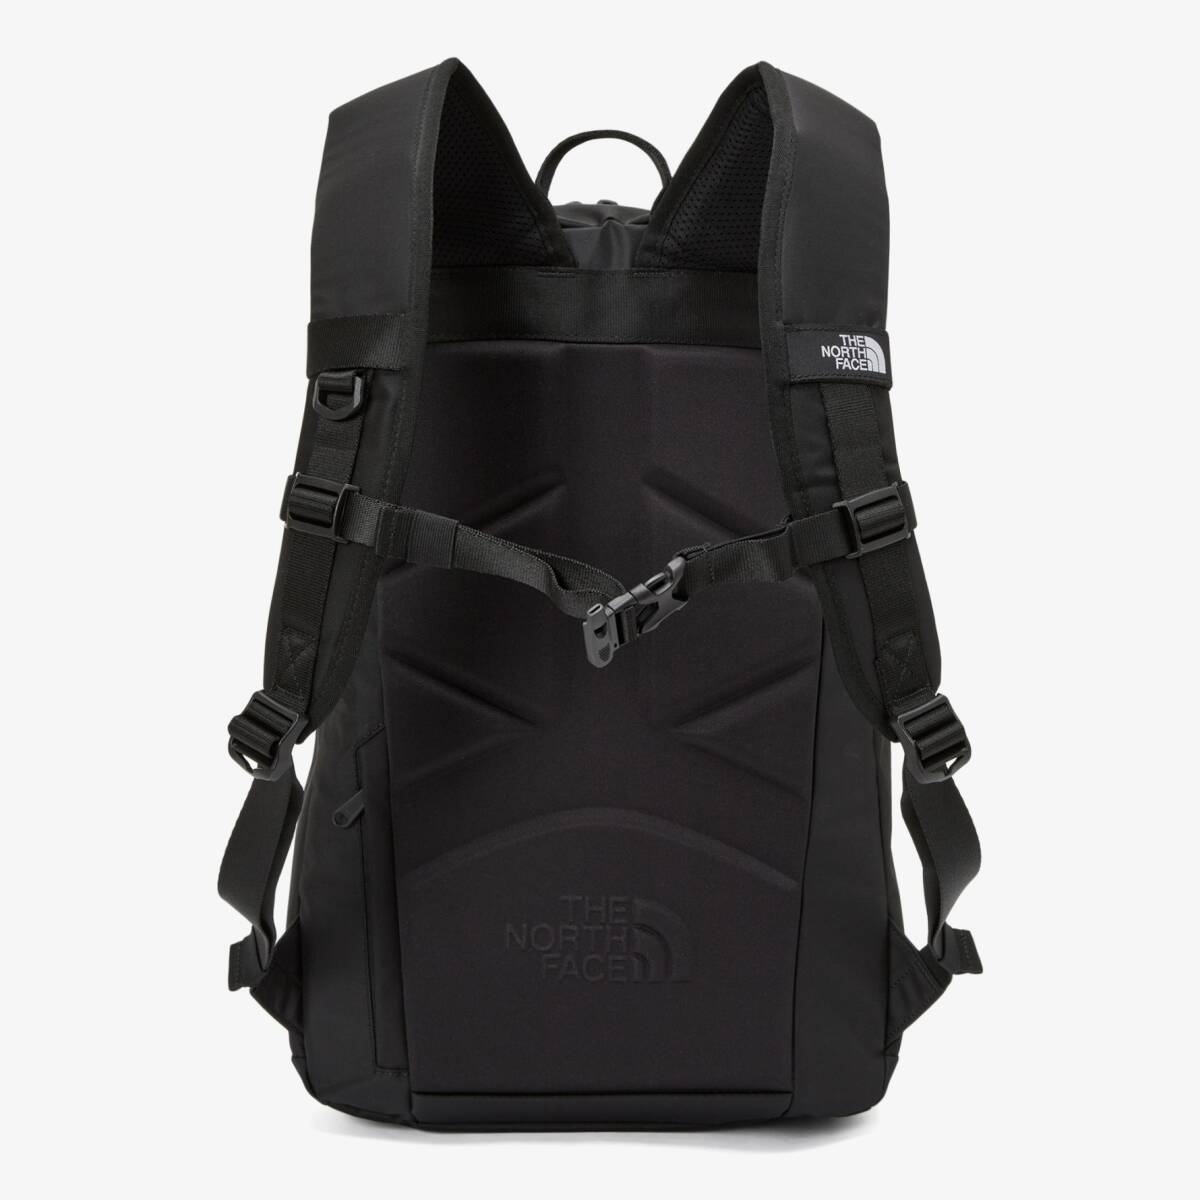 THE NORTH FACE SUPER PACK ザノースフェイス リュック ロゴ NM2DP00J Y6の画像2